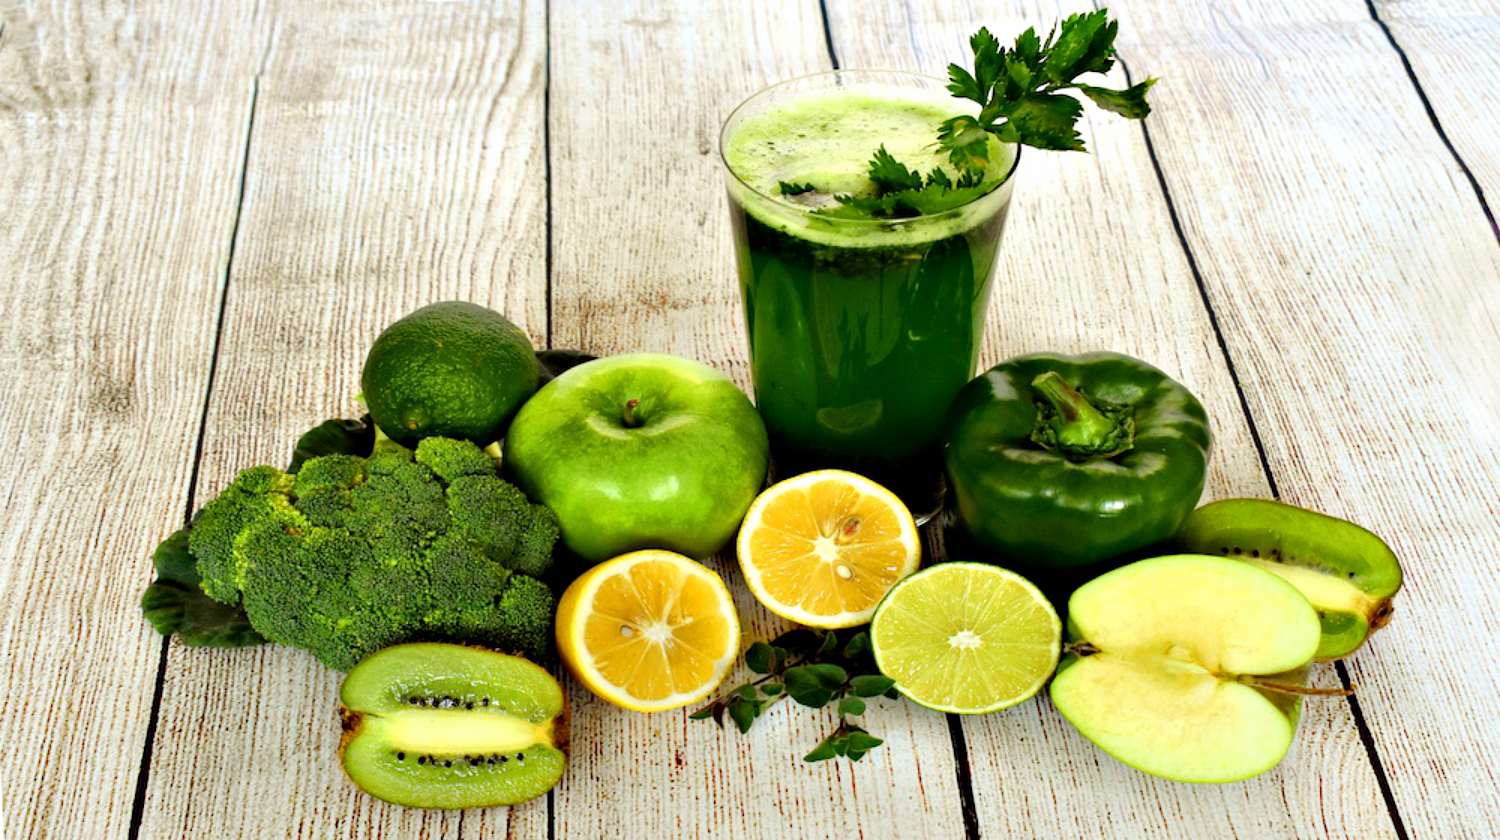 Feature | Green veggies and fruits juice | How To Detox Your Body: Detoxifying Tips, Tricks, And Recipes